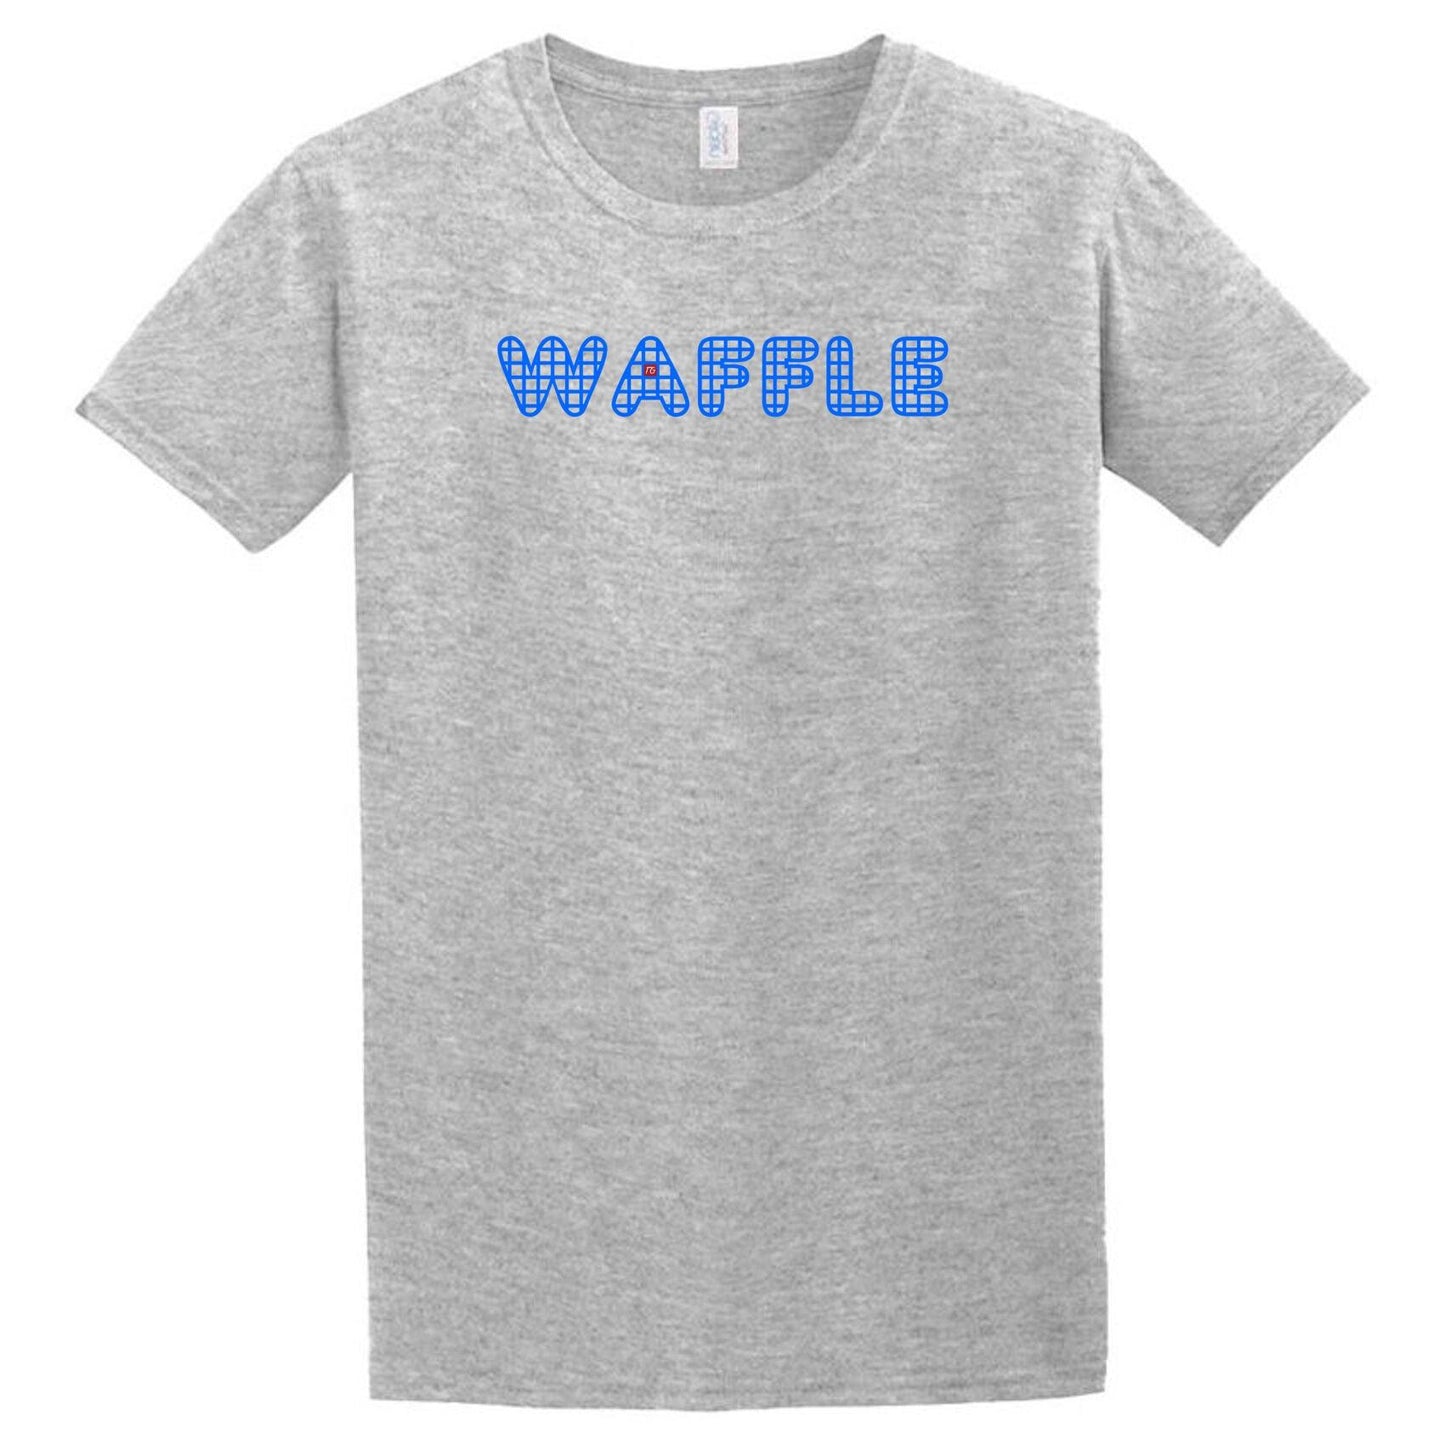 A Blue Waffle T-Shirt with the word waffles on it by Twisted Gifts.